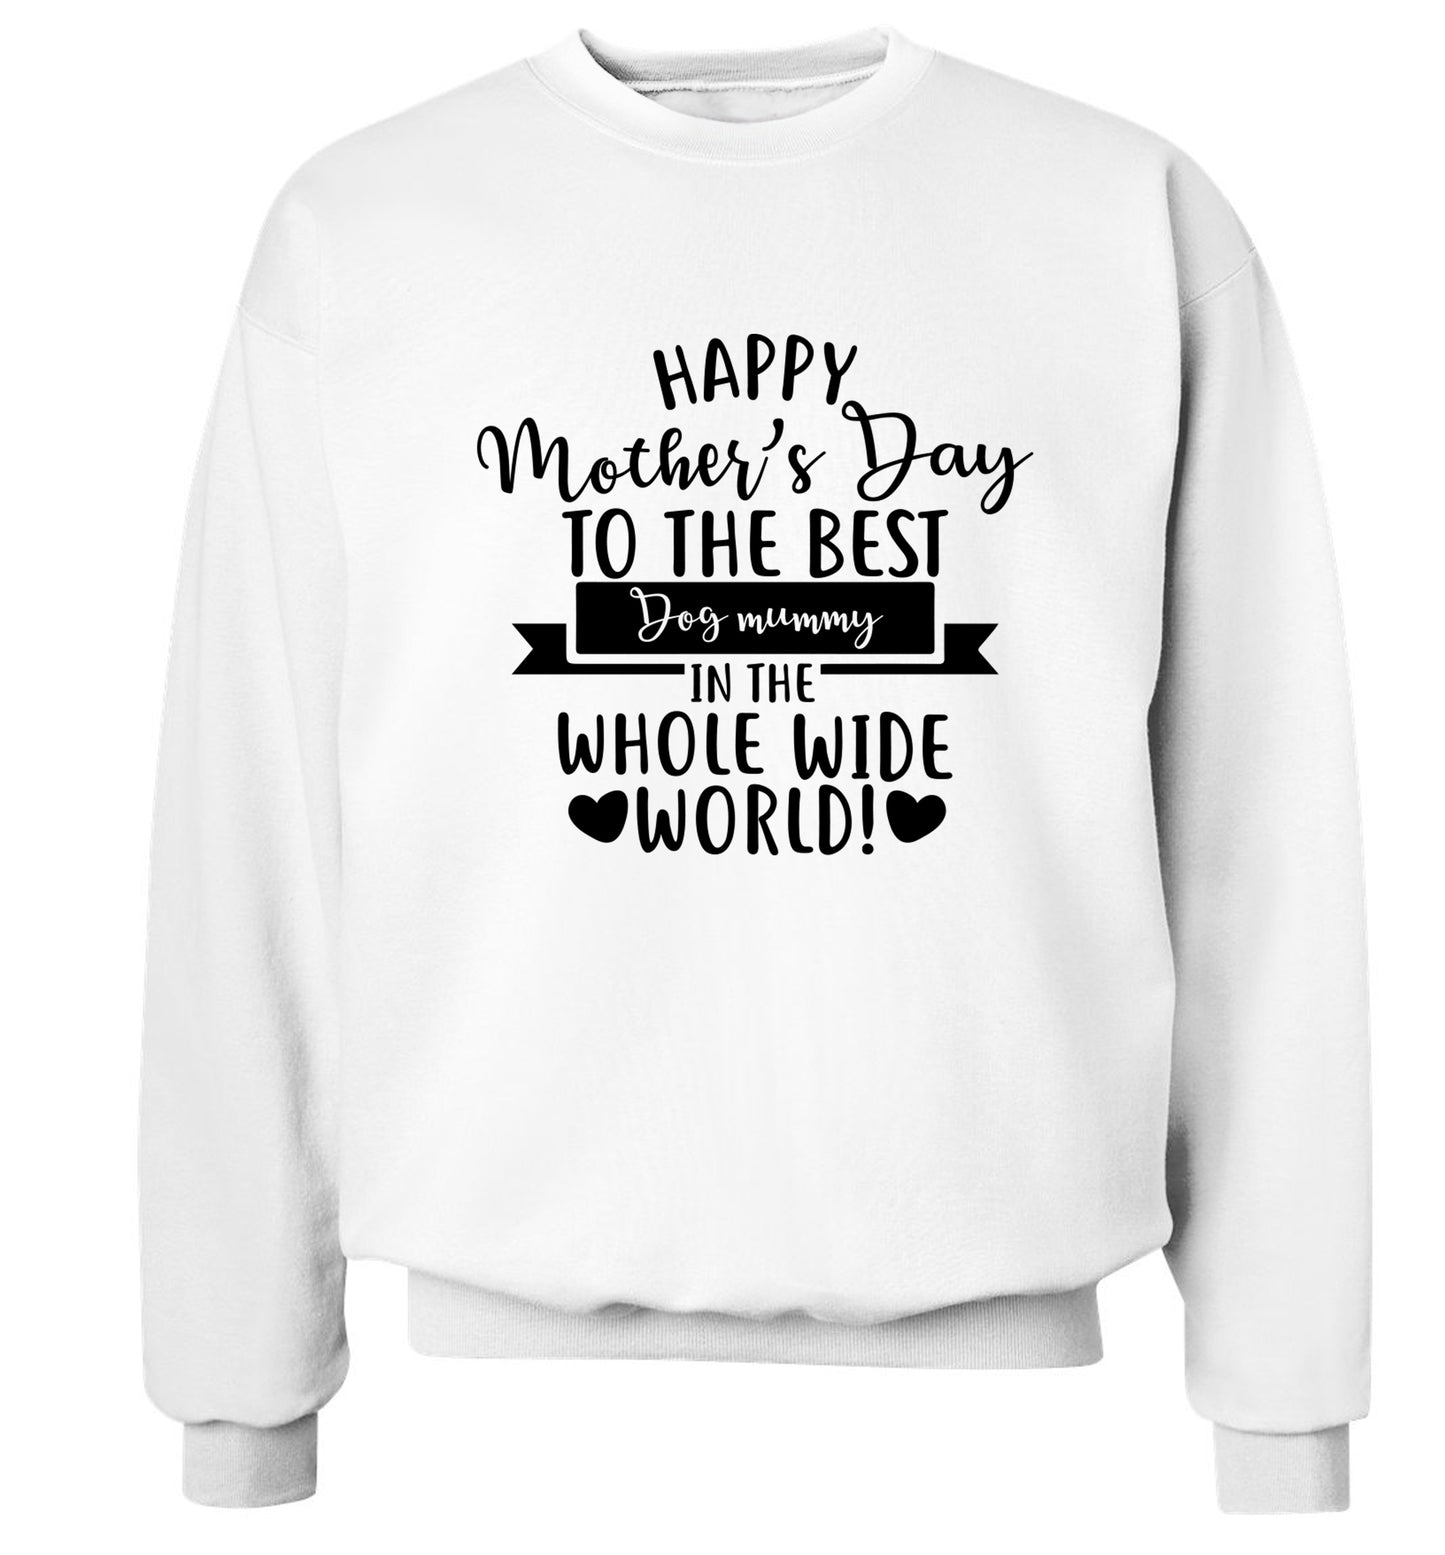 Happy mother's day to the best dog mummy in the world Adult's unisex white Sweater 2XL